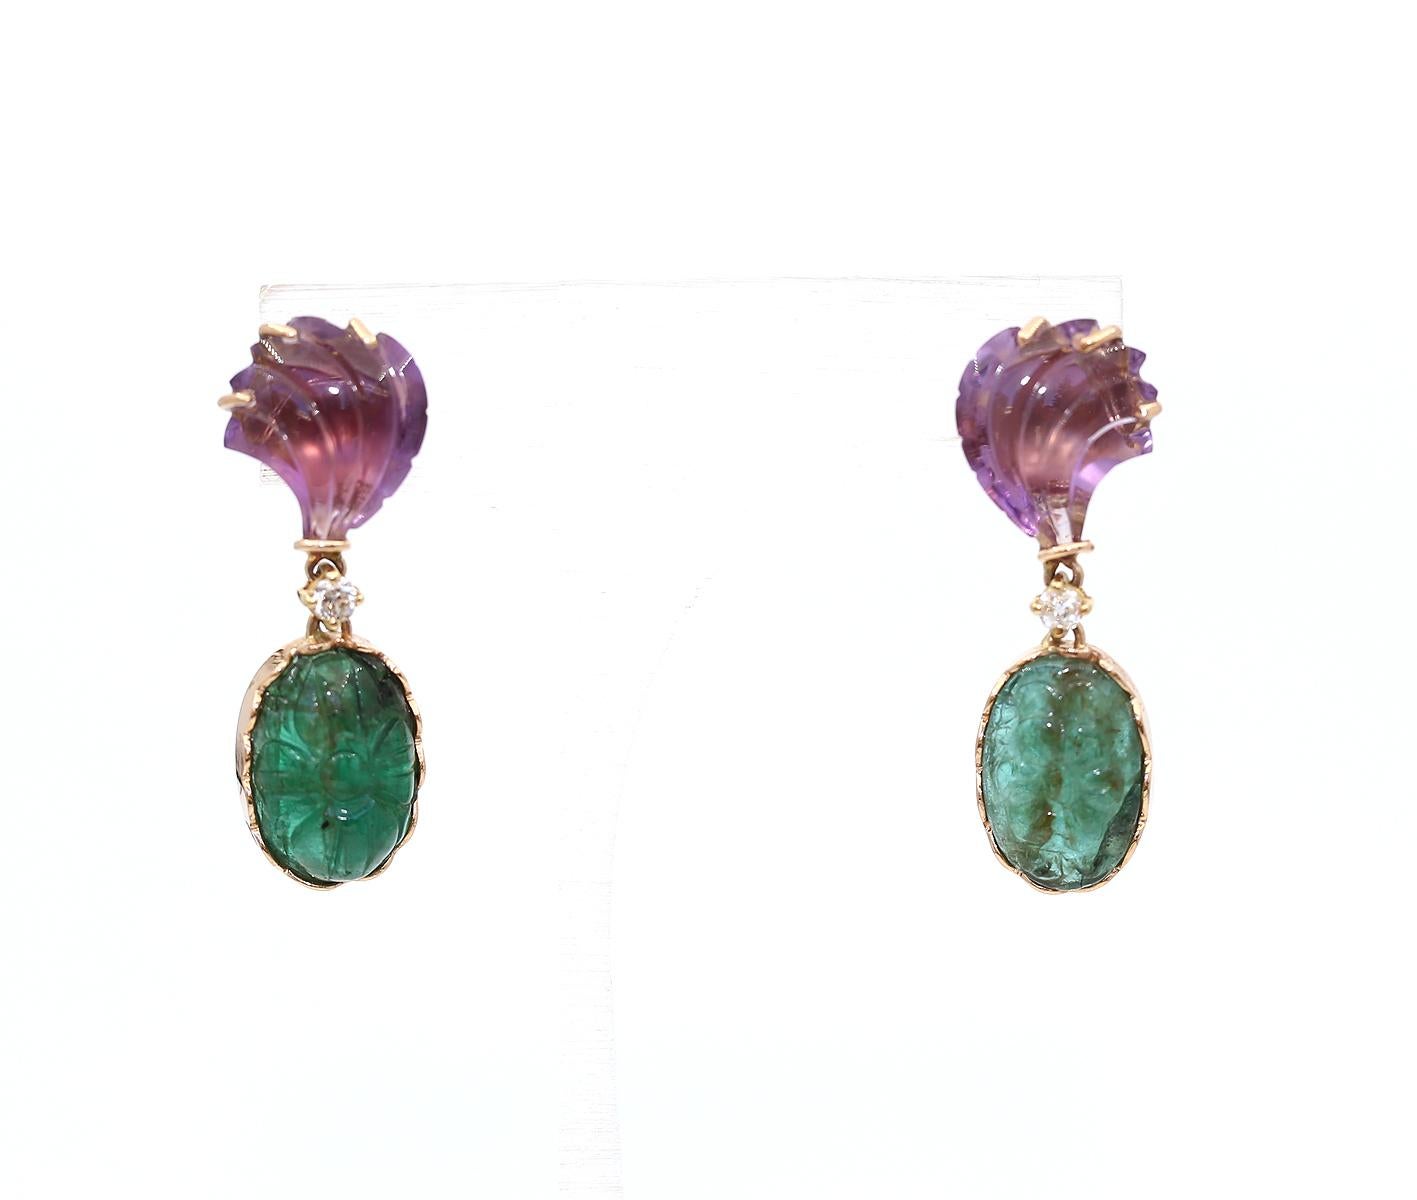 An Art-deco pair of unique hand carved 7  Carats natural Zambian Emerald and 5.5 Carats natural Amethyst dangle earrings. Set in solid 18 K Yellow Gold.  

Just an amazing item with beautiful coloration between the Amethyst and fine green Emeralds